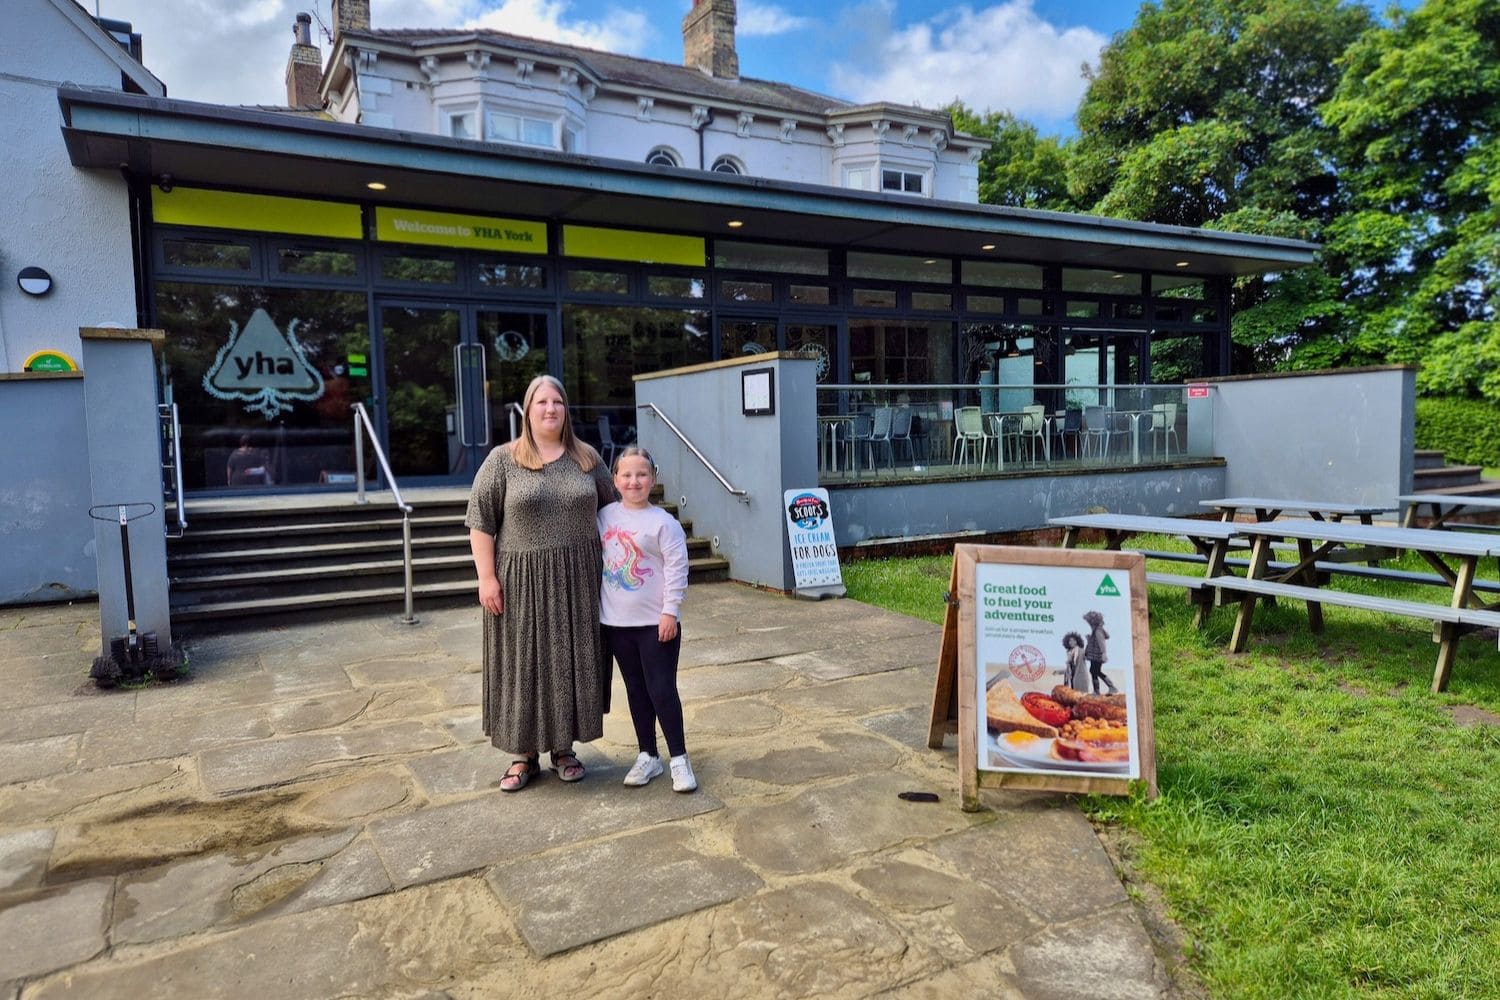 Mother and daughter stood outside the main entrance to YHA York